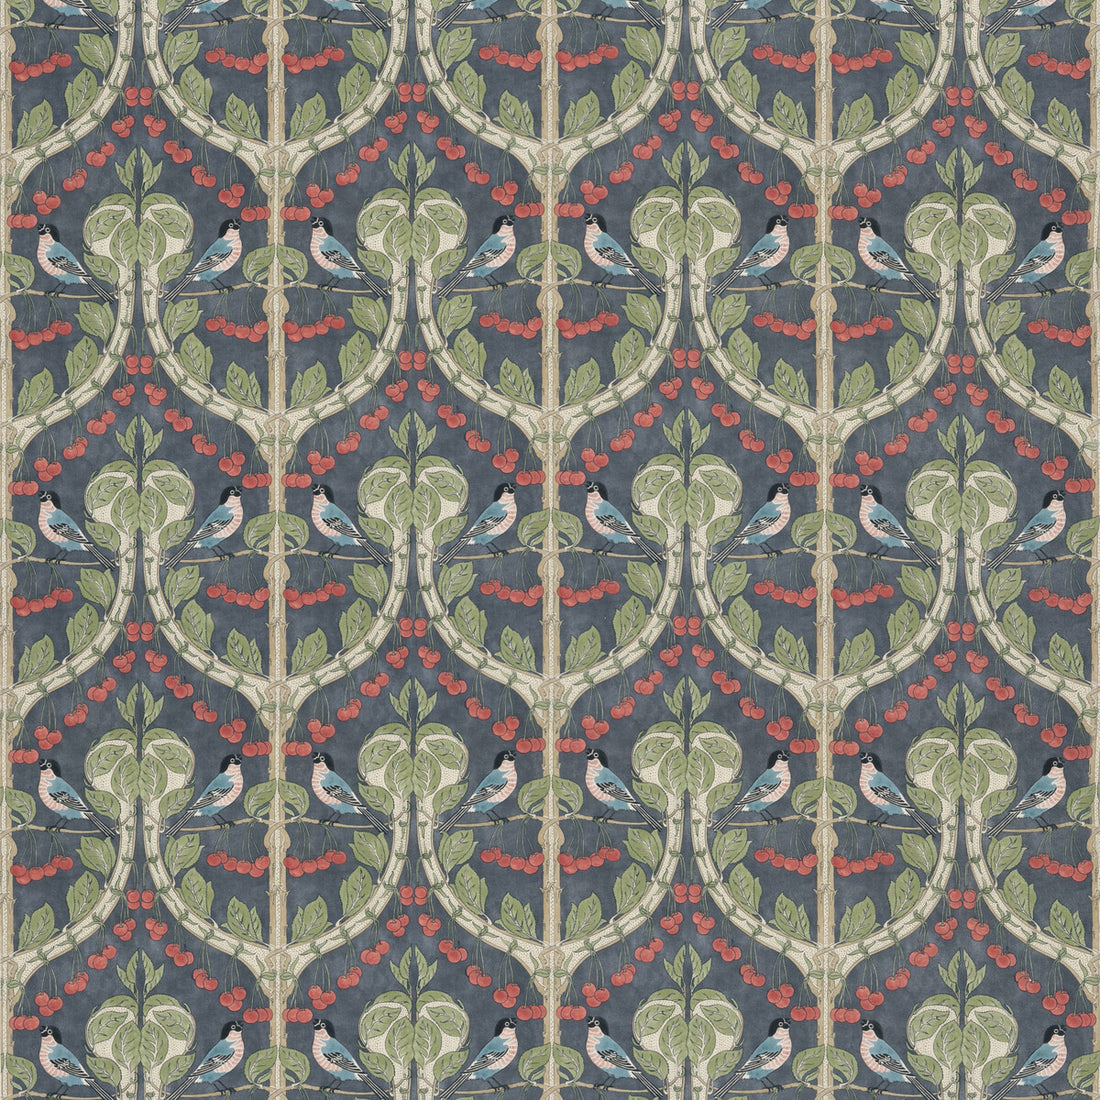 Birds &amp; Cherries Cotton fabric in indigo color - pattern BP10967.2.0 - by G P &amp; J Baker in the Original Brantwood Fabric collection